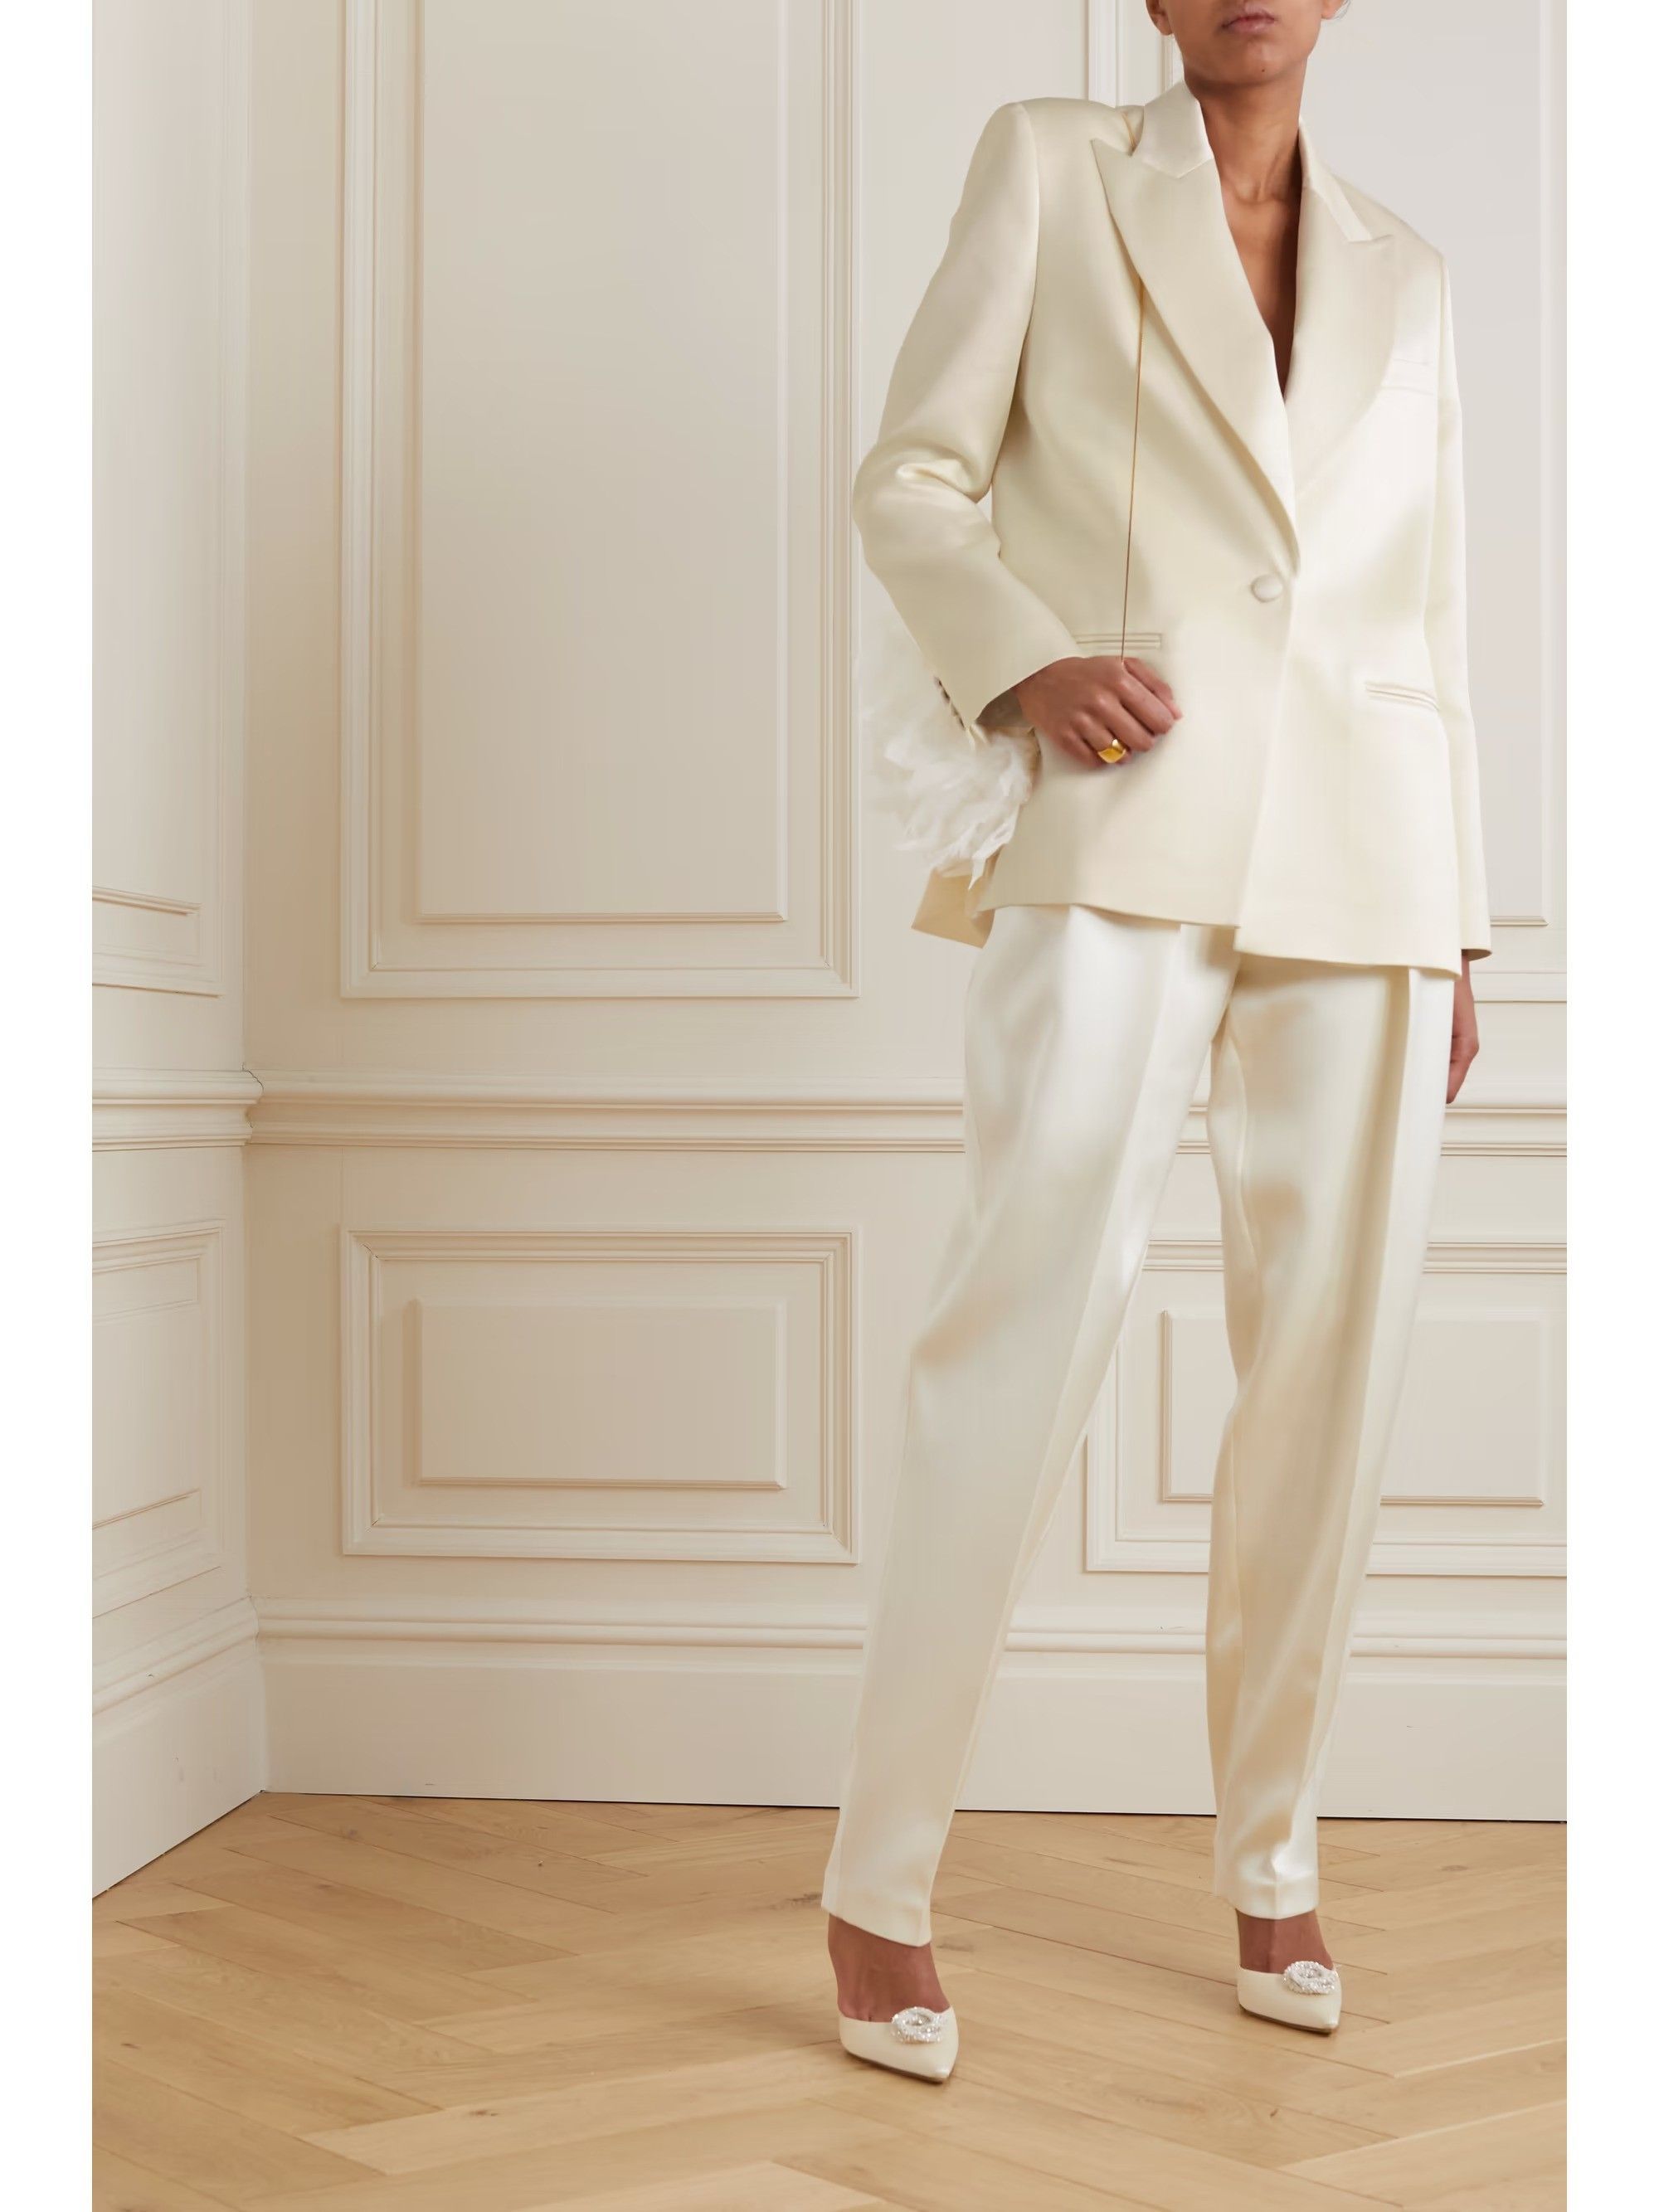 21 Chic Wedding Suits For Women Who Want to Rock a Bridal Suit | Women  suits wedding, London wedding, White wedding suit